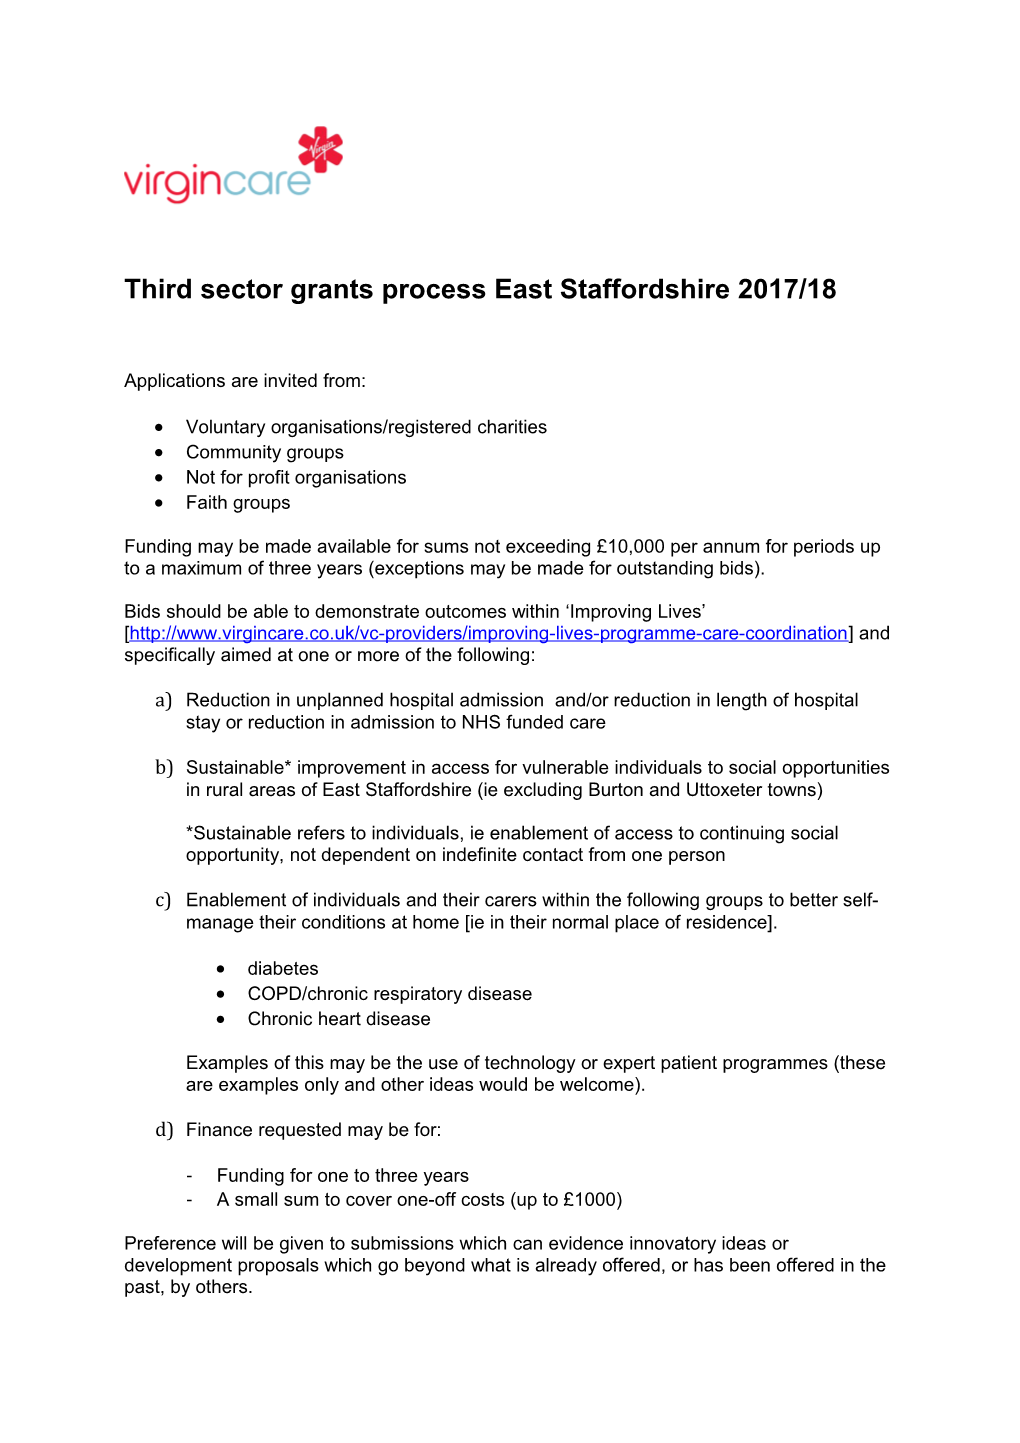 Third Sector Grants Process East Staffordshire 2017/18